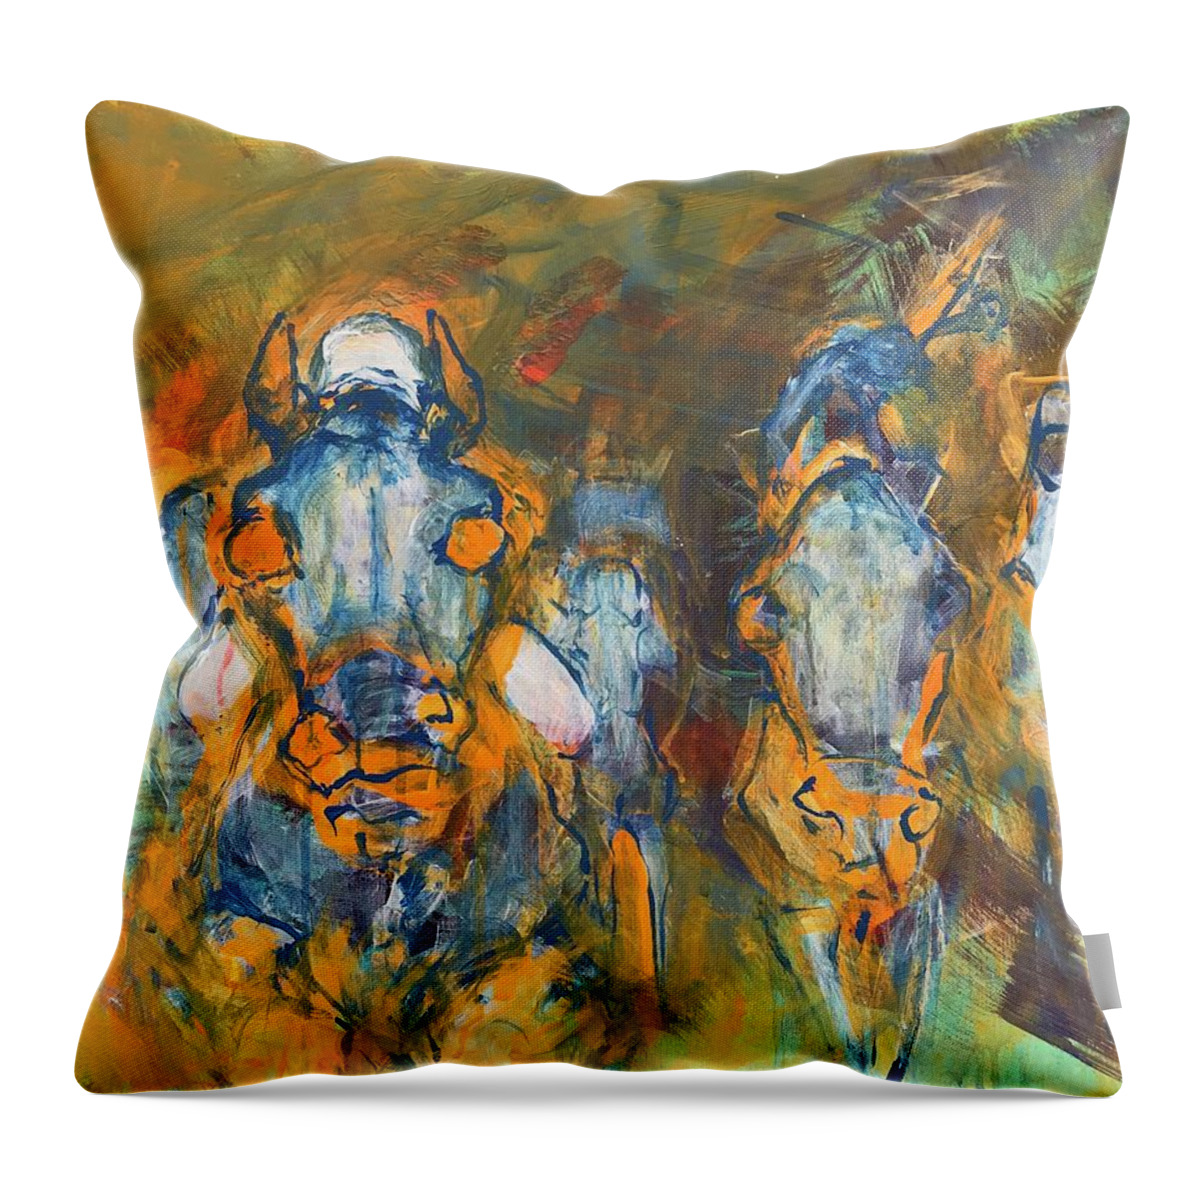 Horses Throw Pillow featuring the painting Finish Line by Elizabeth Parashis